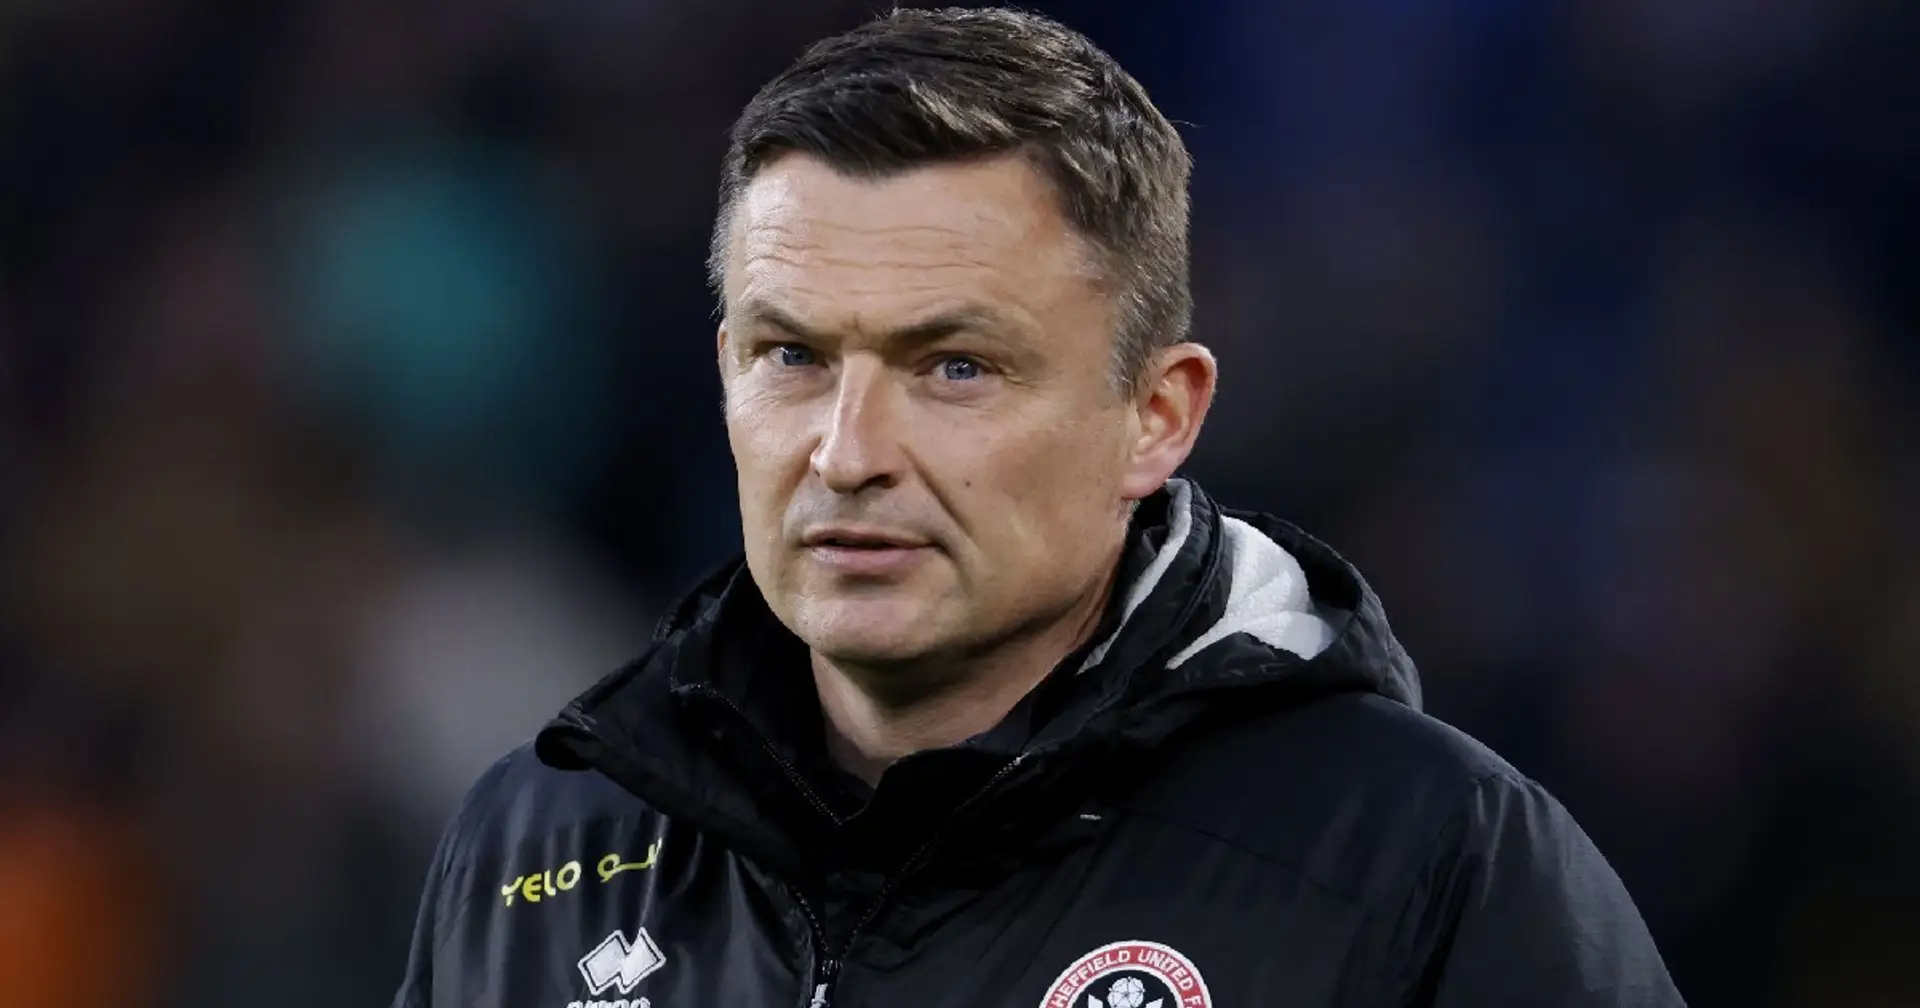 Liverpool's next opponents Sheffield to sack manager Heckingbottom ahead of clash